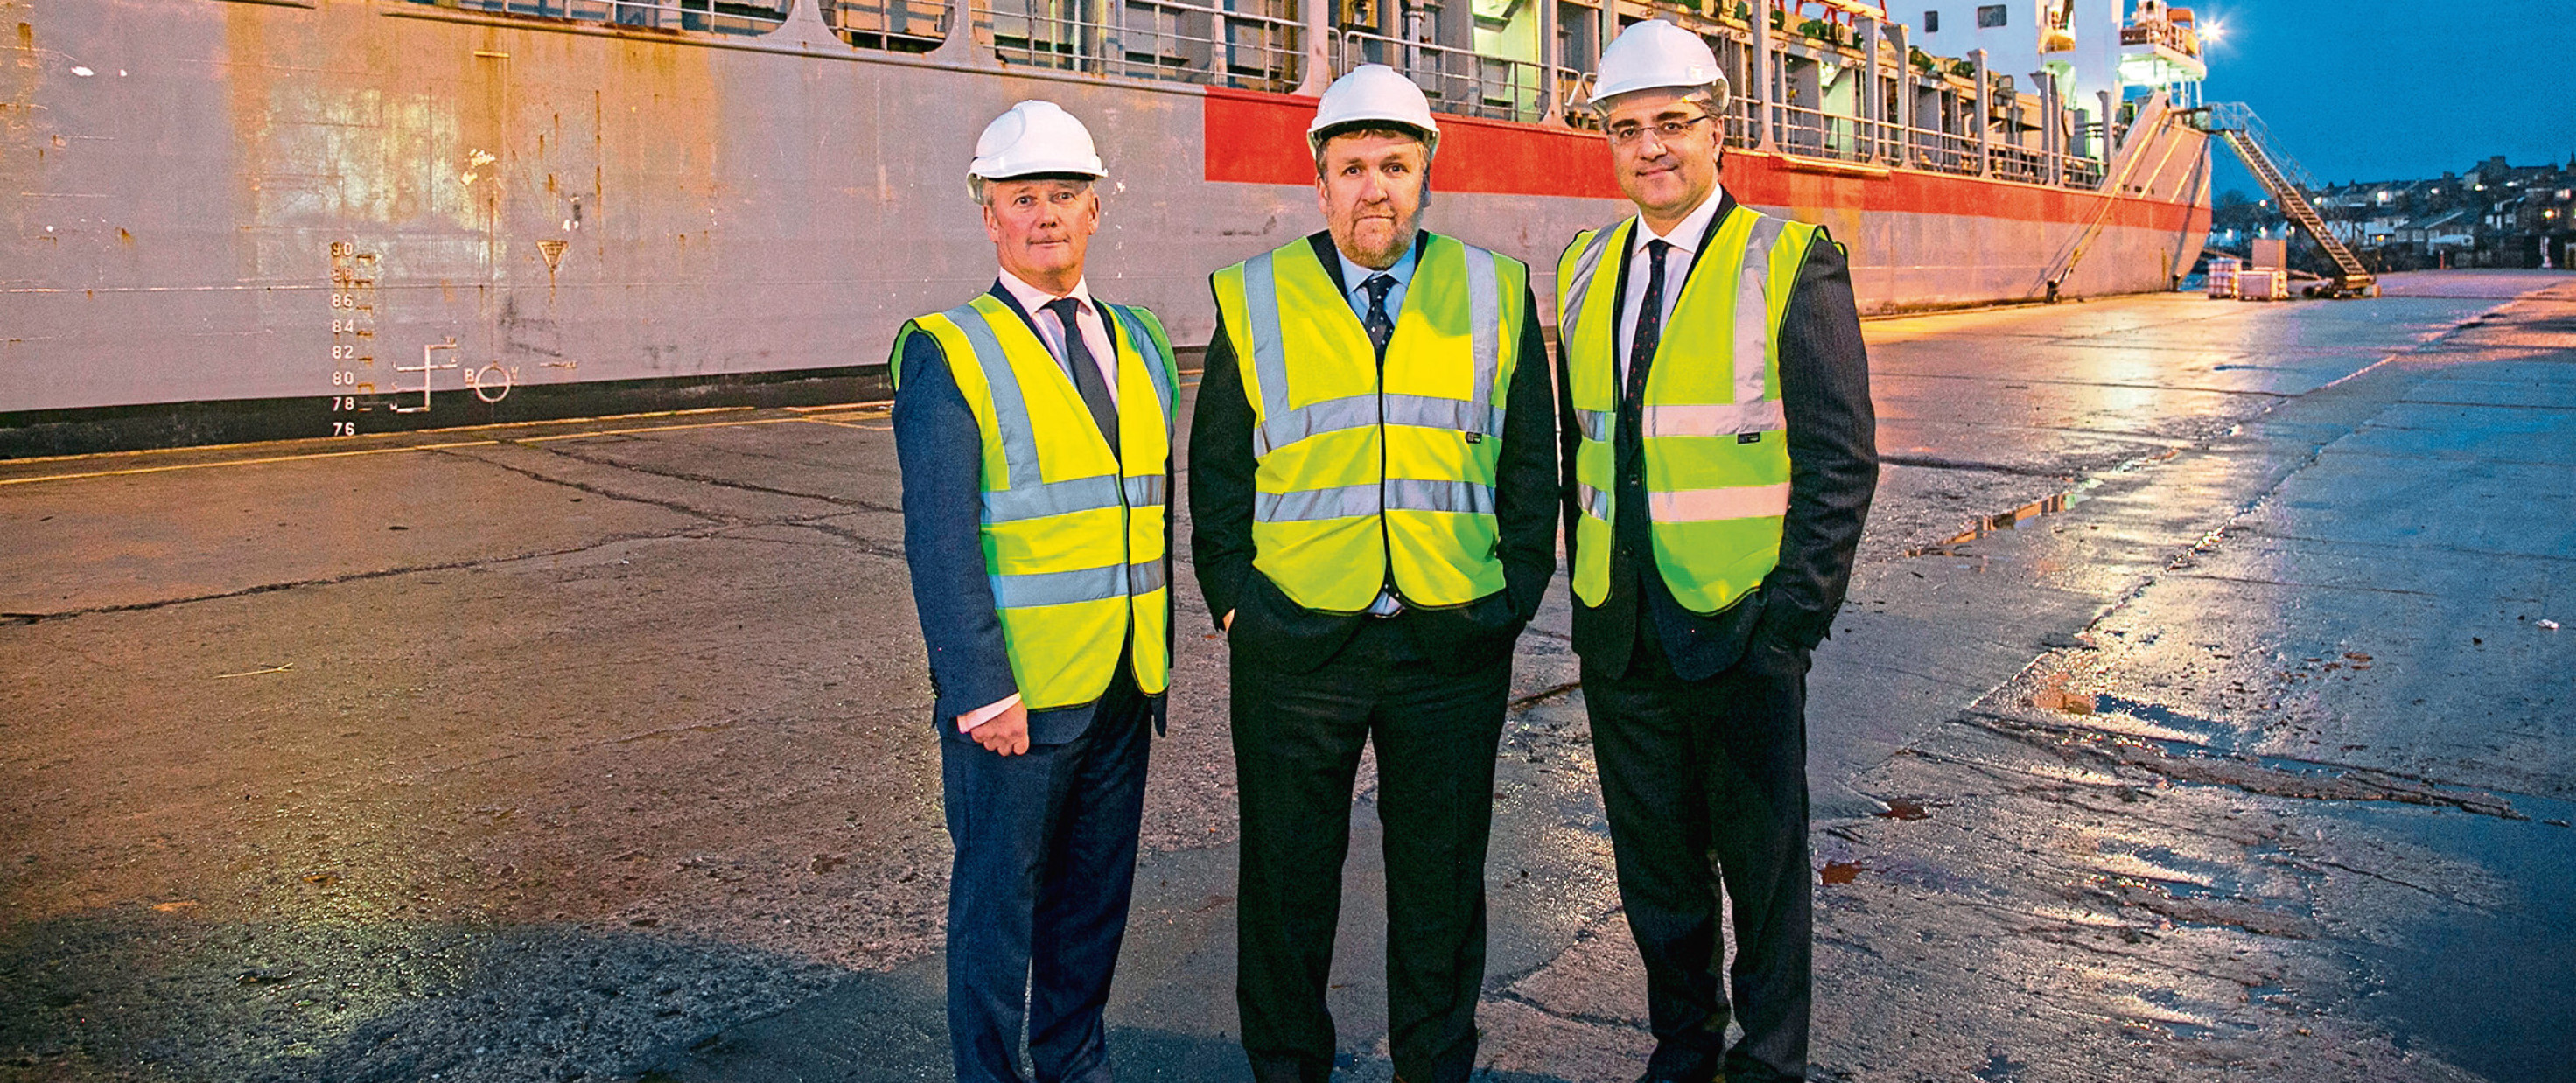 Baker Hughes has extended its deal with Montrose Port Authority by seven years.
From left Peter Stuart MPA, Vice-Chairman, Captain Tom Hutchison MPA, CEO and Lorenzo Romagnoli, Baker Hughes Director of Supply Chain